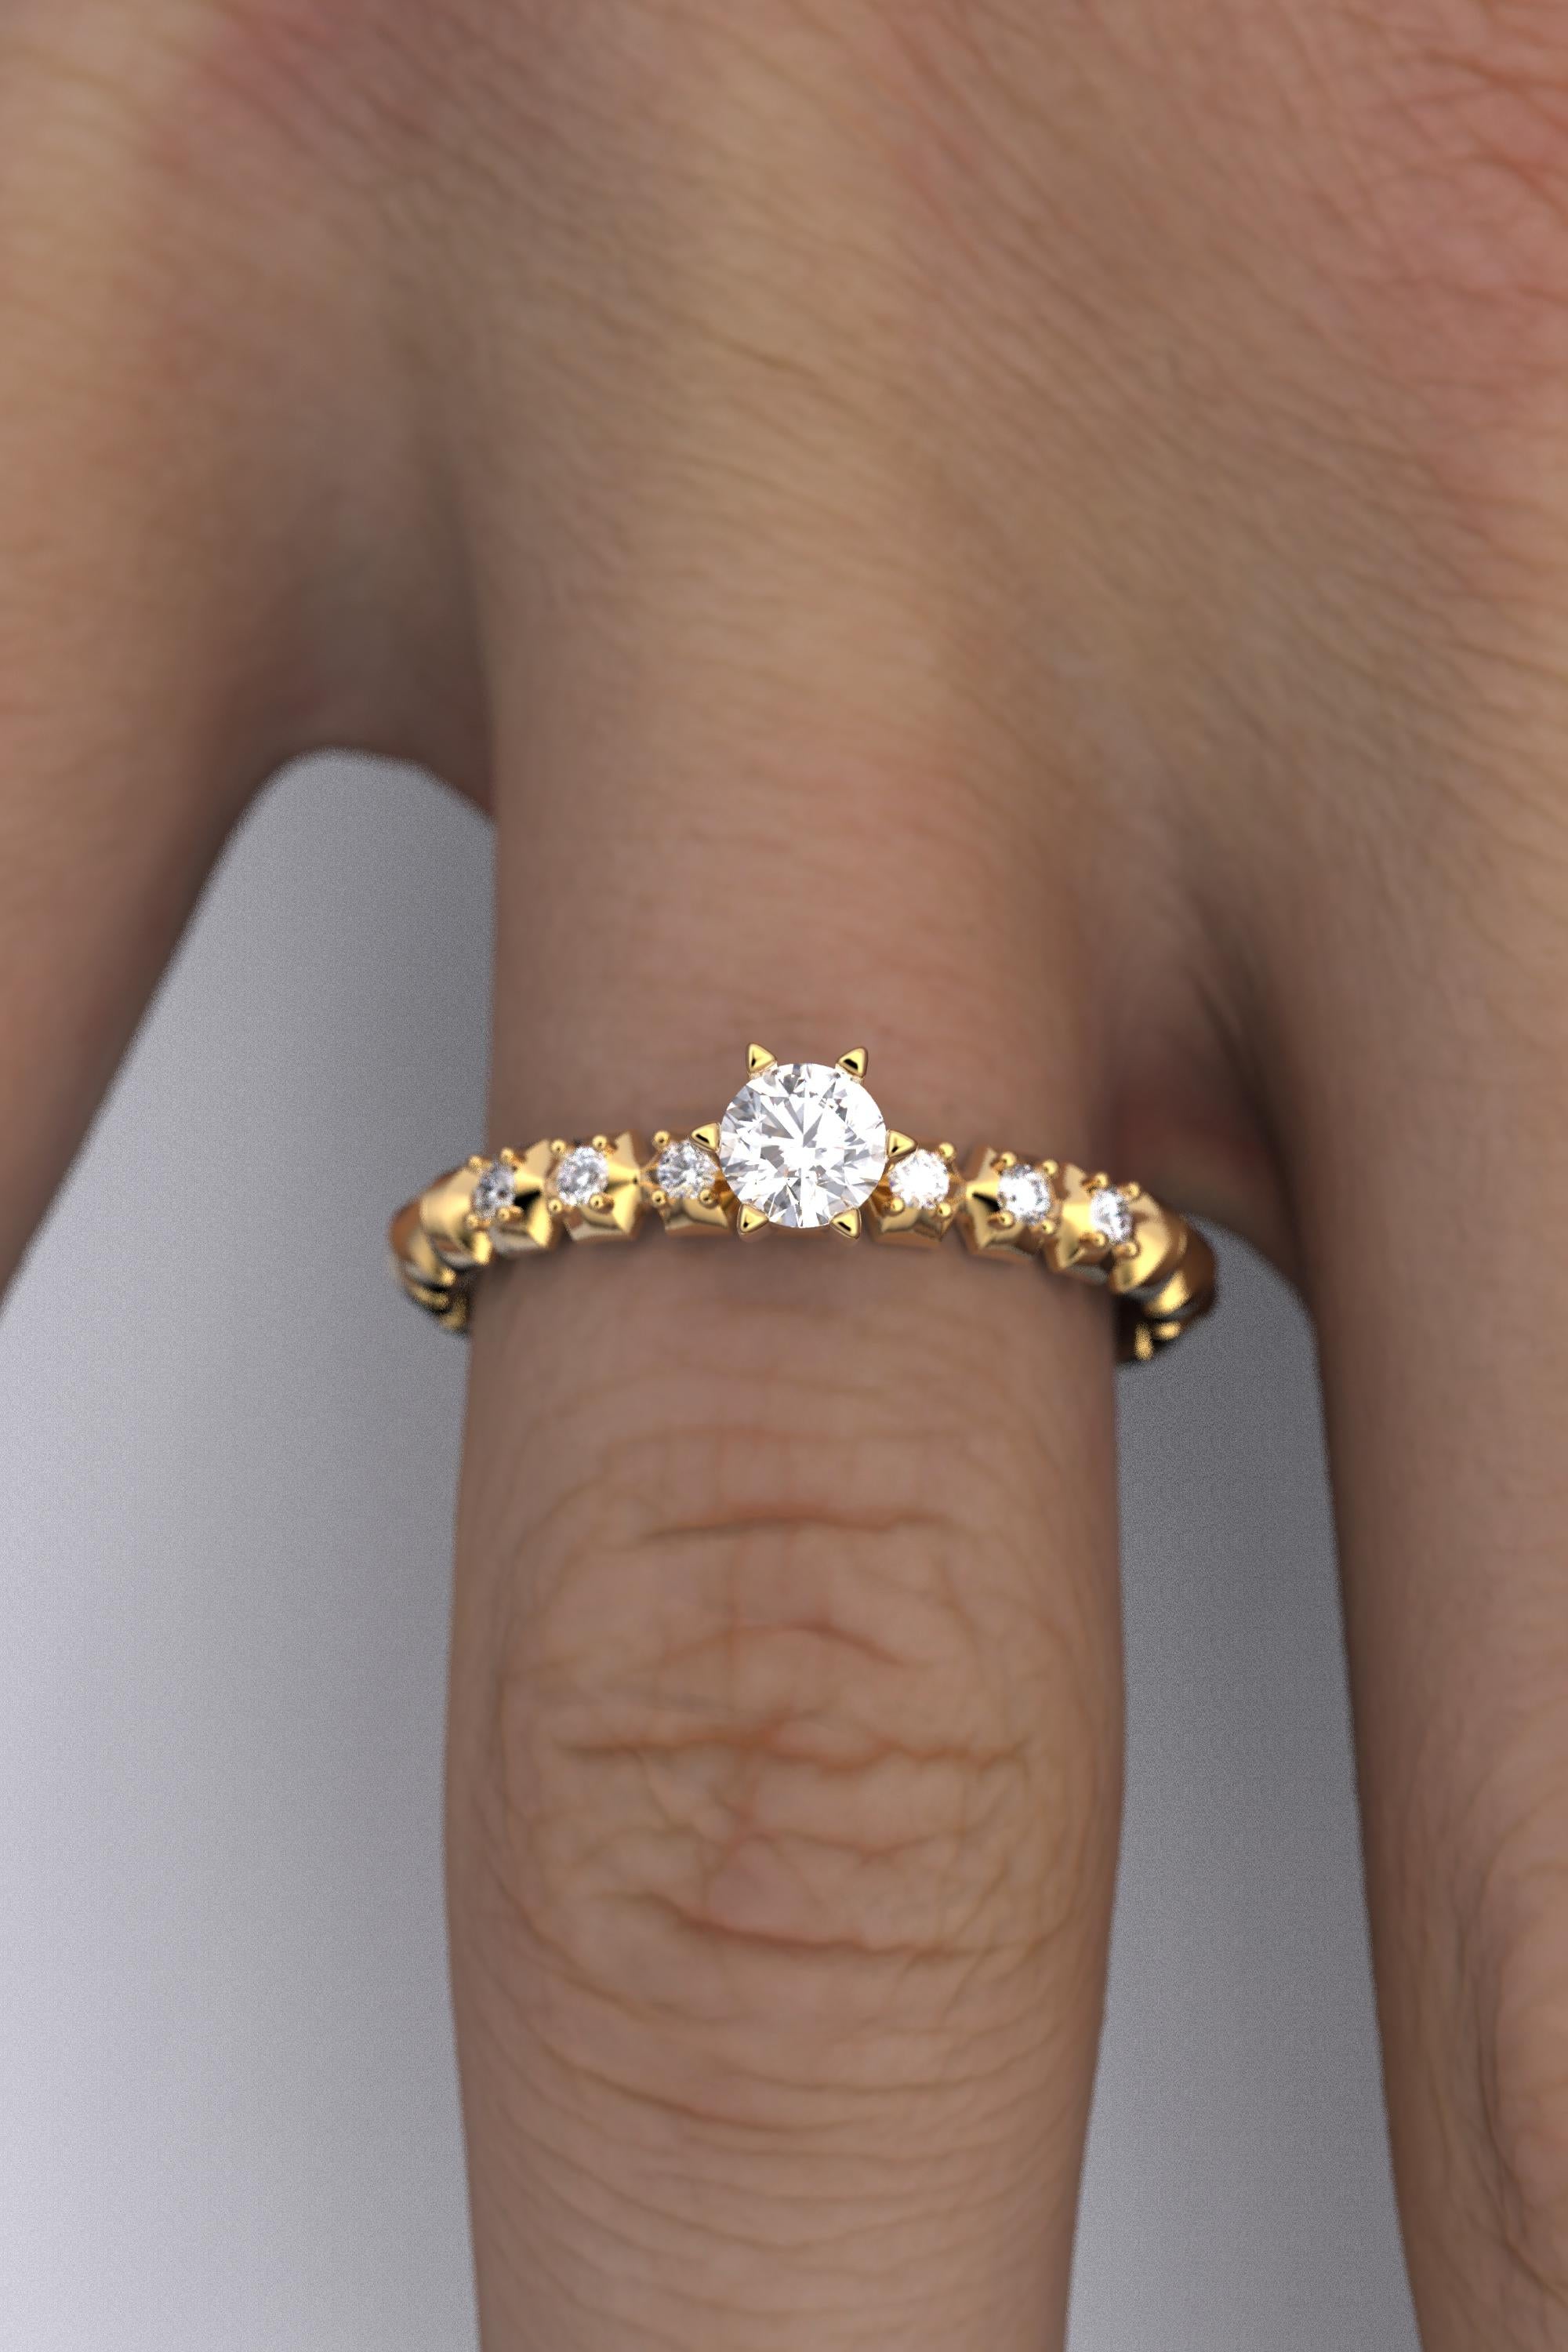 For Sale:  Italian-Made 0.32 Carat Diamond Engagement Ring in 18k Solid Gold 11